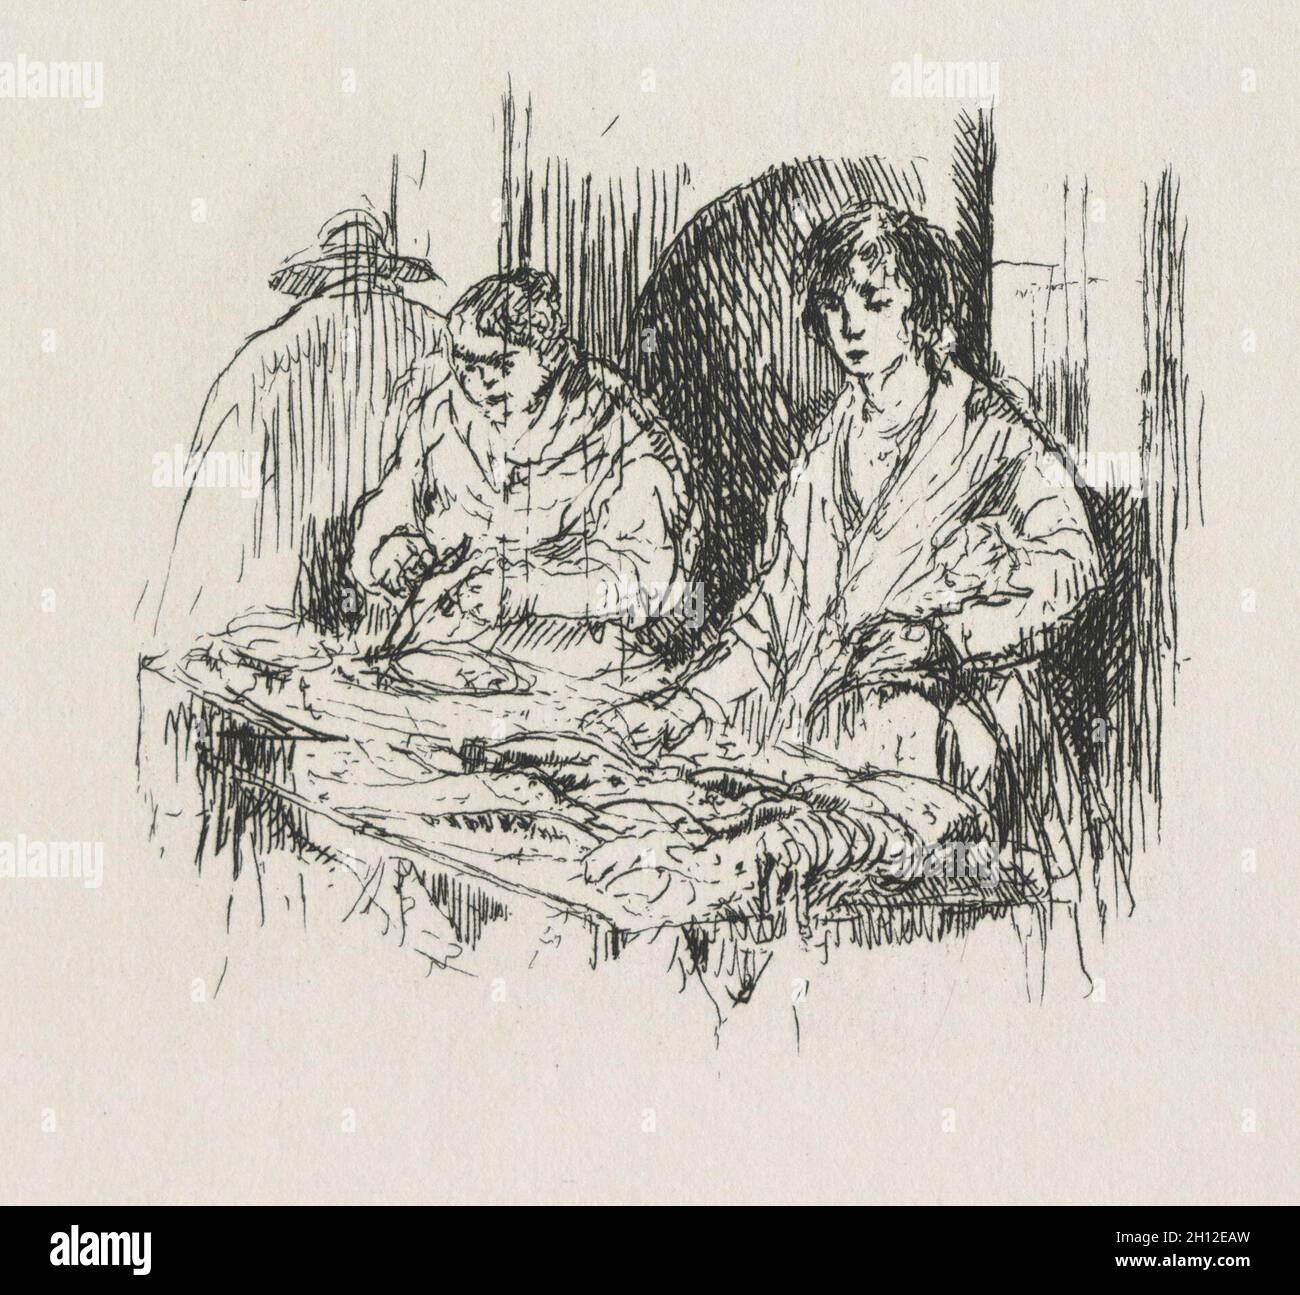 Le Drageoir aux épices by J. K. Huysmans: p. 59, 1929. Auguste Brouet (French, 1872-1941), J.K. Huysmans (French). Book containing 54 etchings; overall: 28.7 x 23.3 x 4.5 cm (11 5/16 x 9 3/16 x 1 3/4 in.). Stock Photo